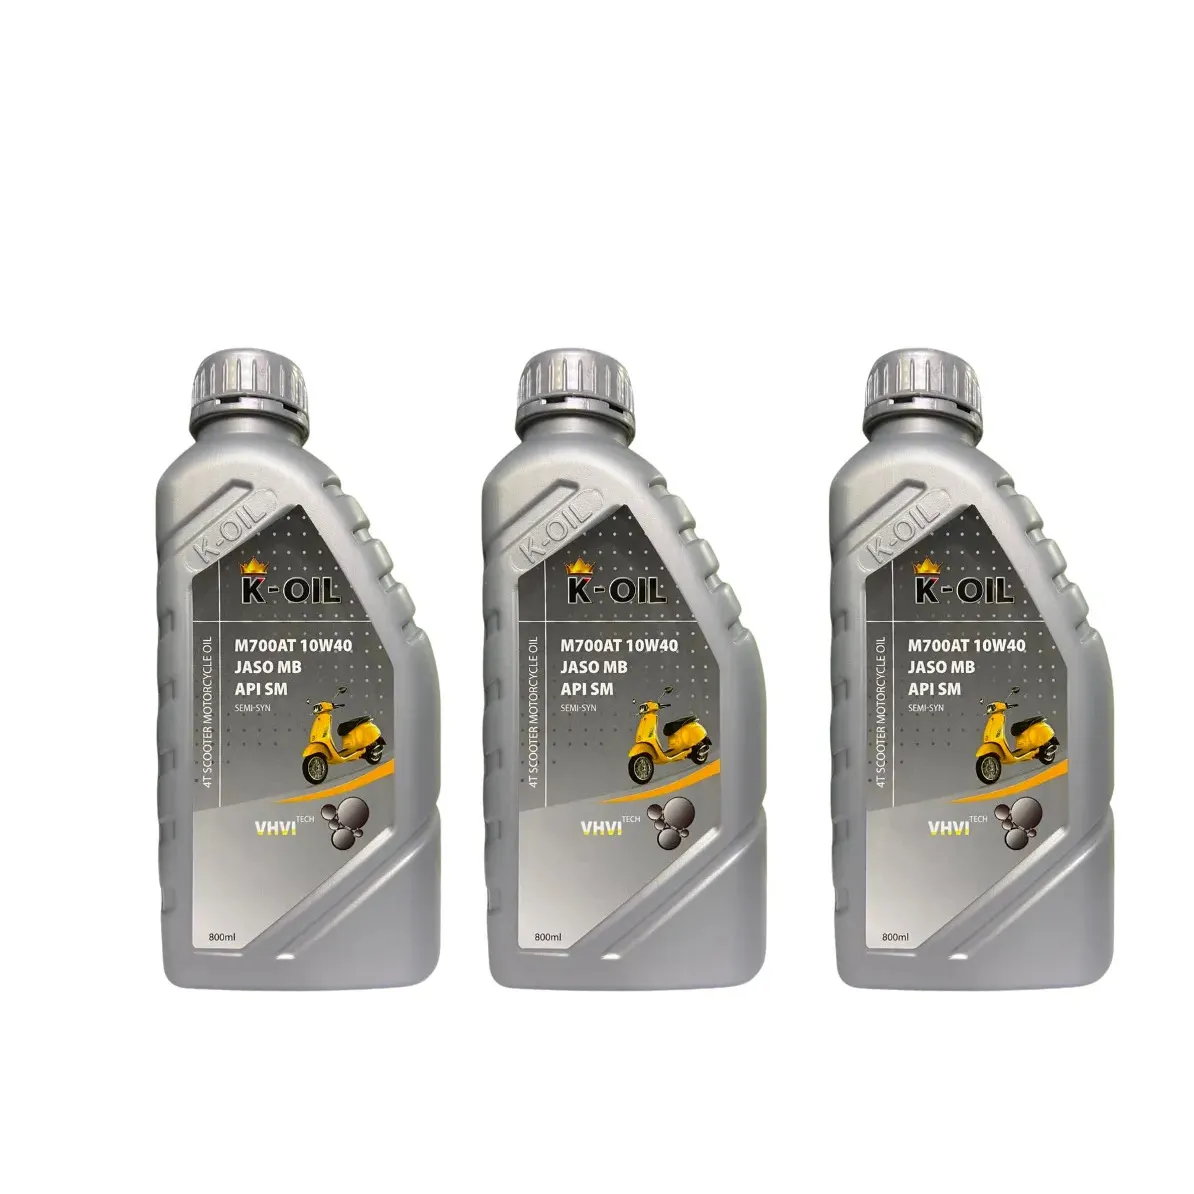 Vietnam K-OIL M700AT JASO MB API SM 10W40, wear protection and cheap price for motorbike applications. motorcycle oil